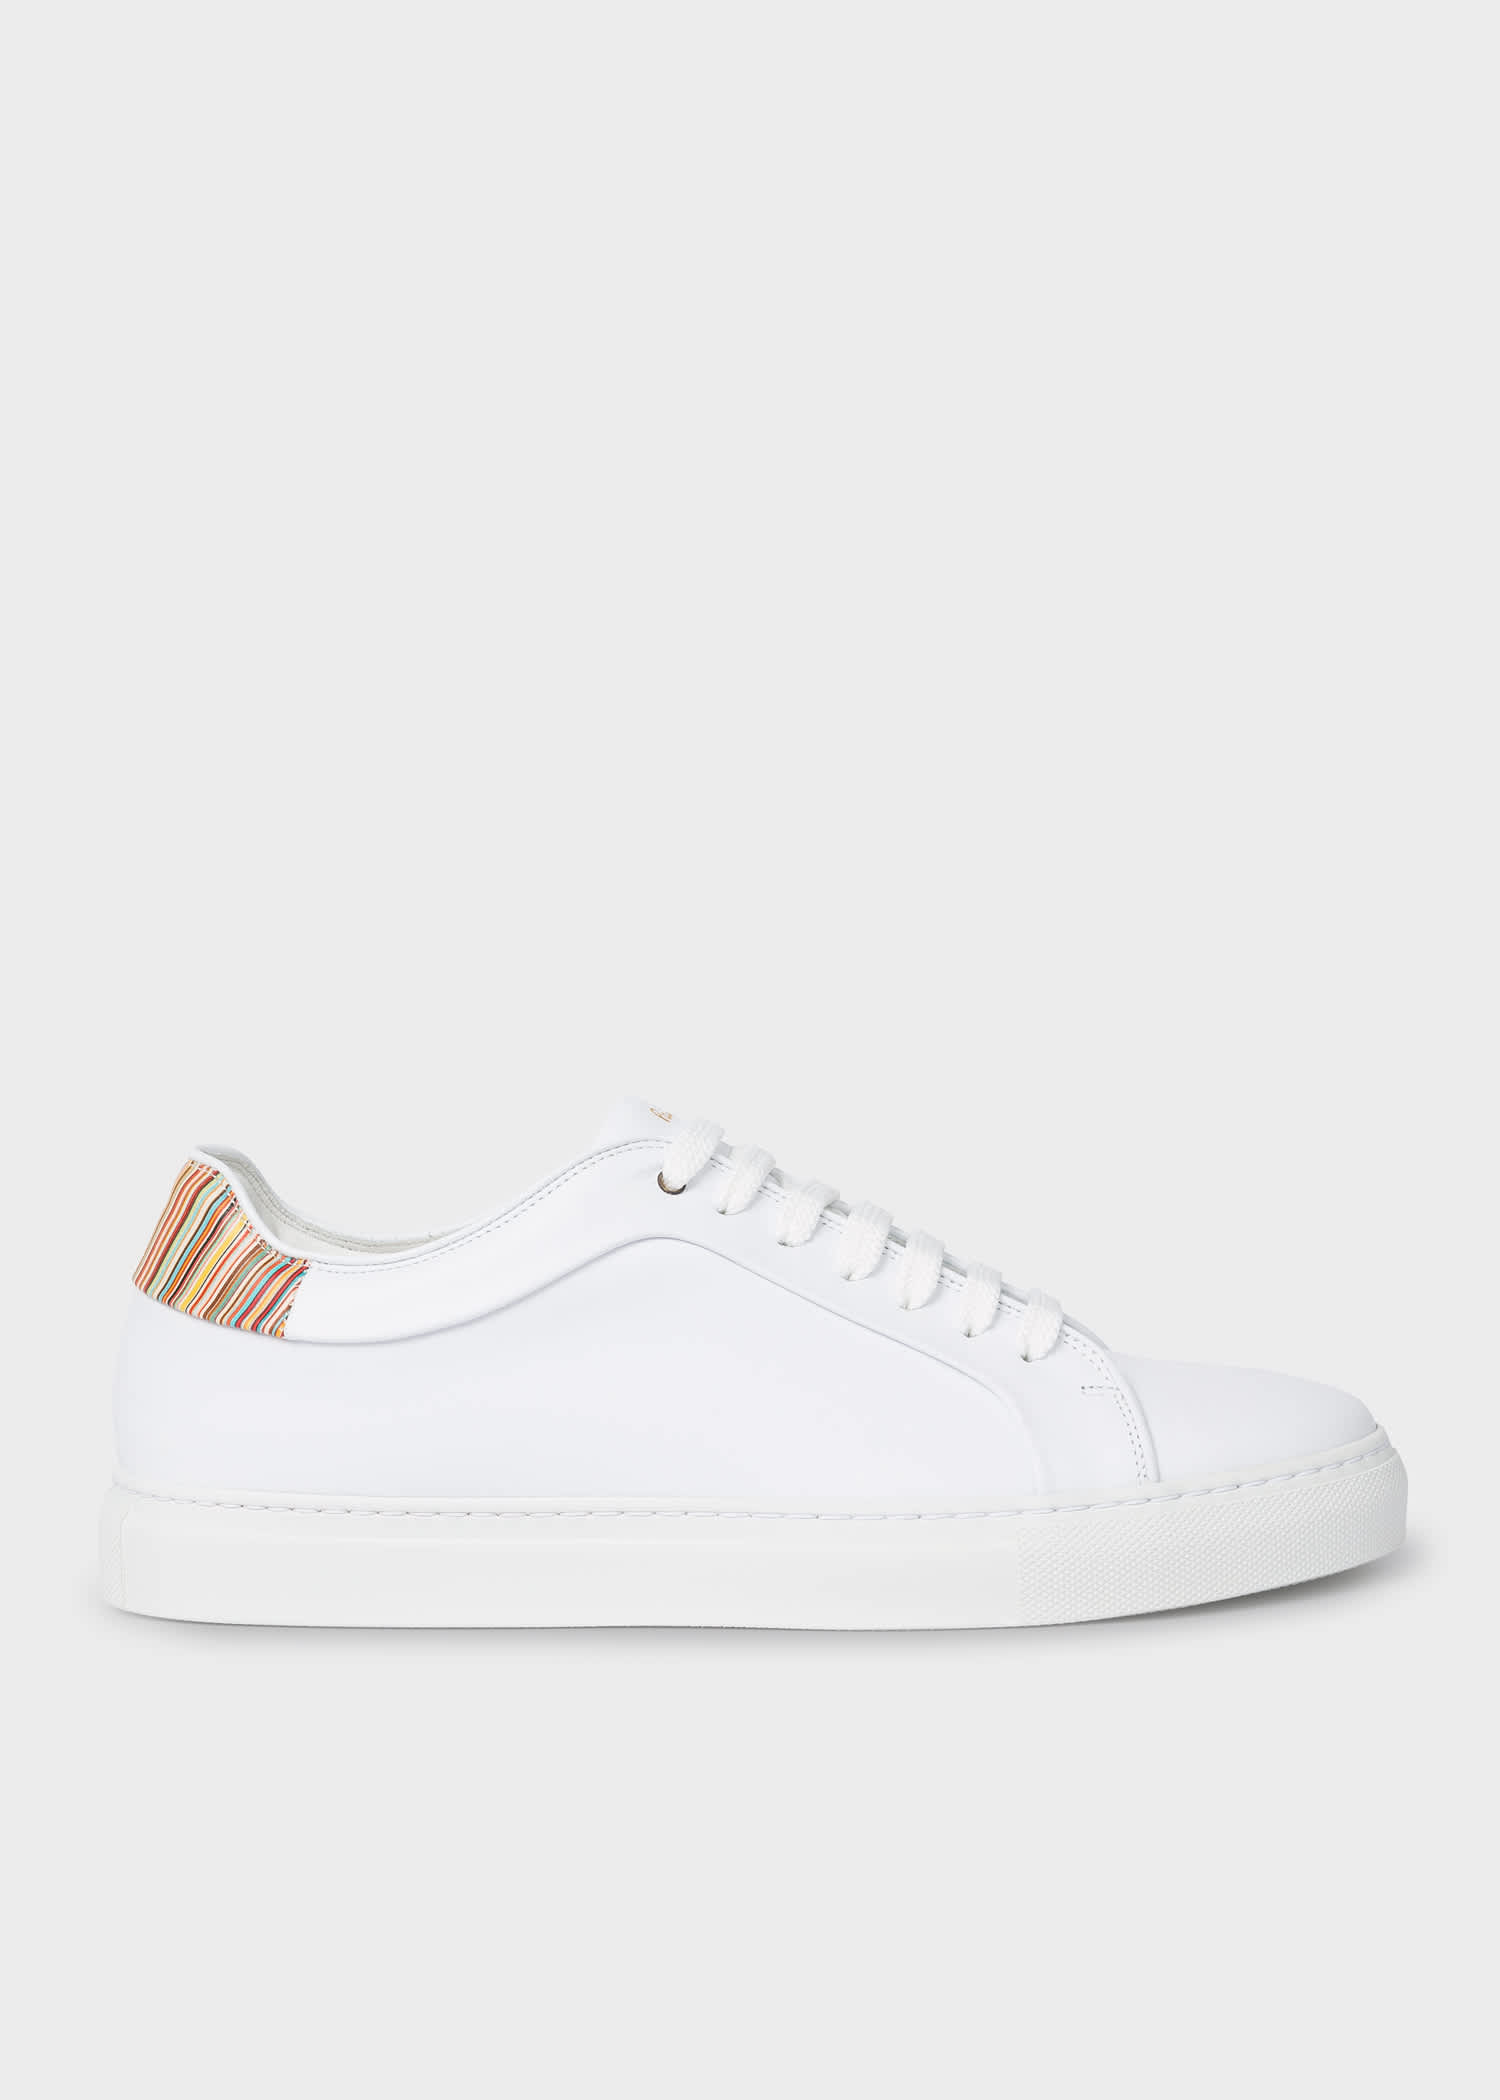 Men's White Leather 'Basso' Trainers With Signature Stripe Trims